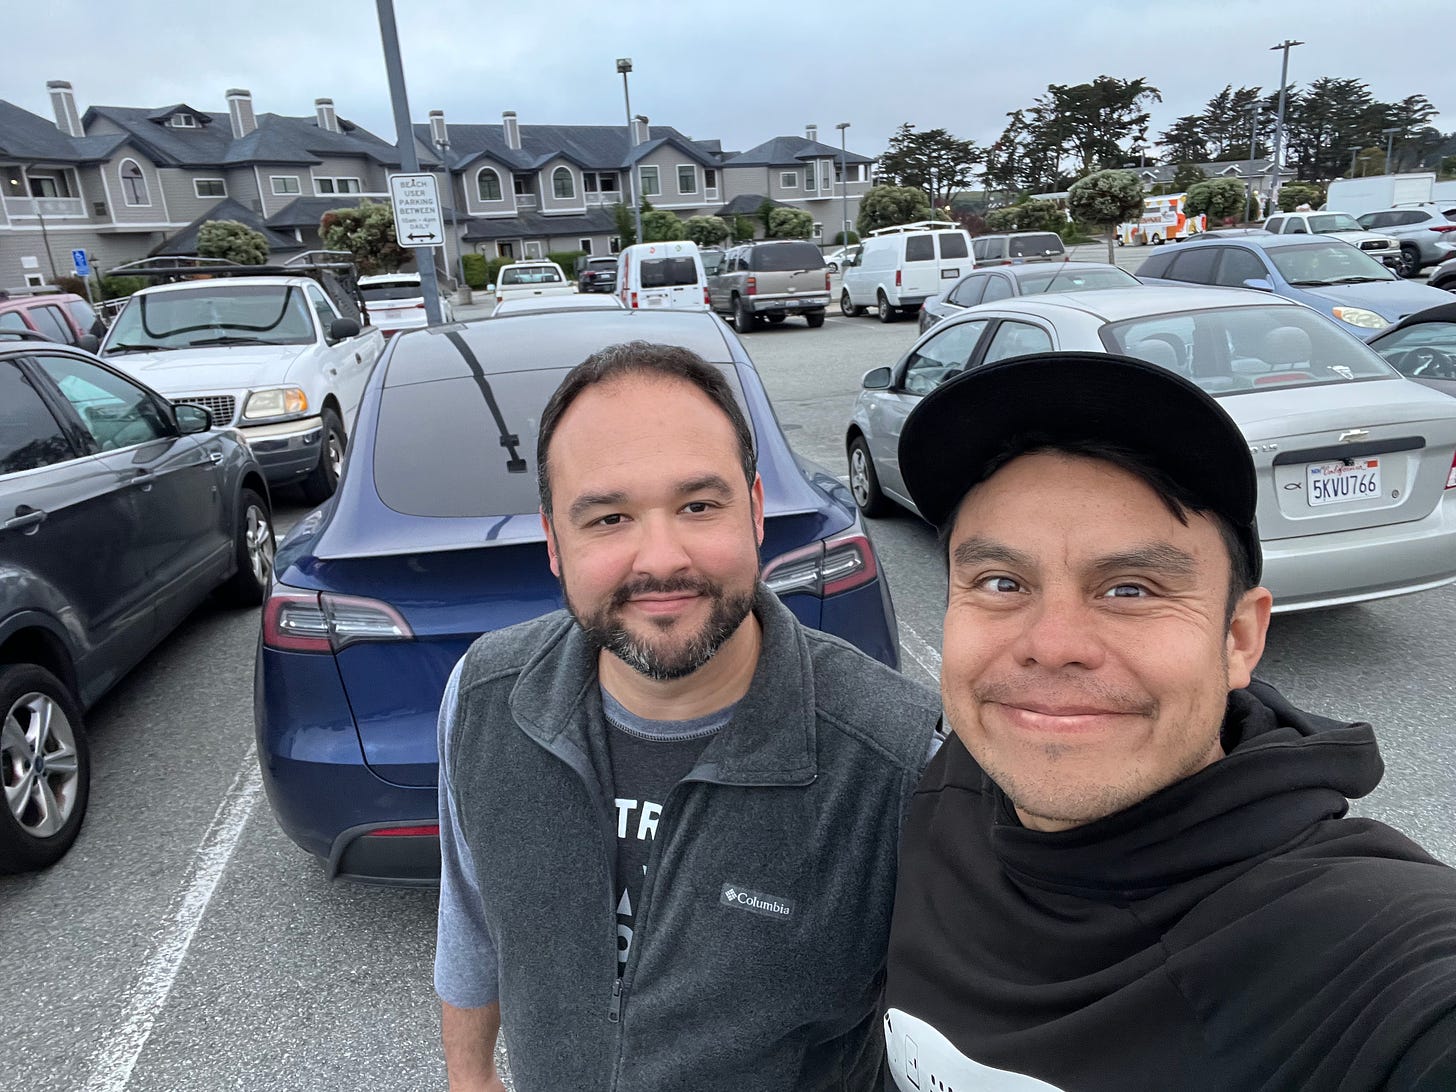 Pic: Grateful to my compadre Juan for lending me his car for my 10-day Vipassana meditation retreat. His generosity made this experience possible.